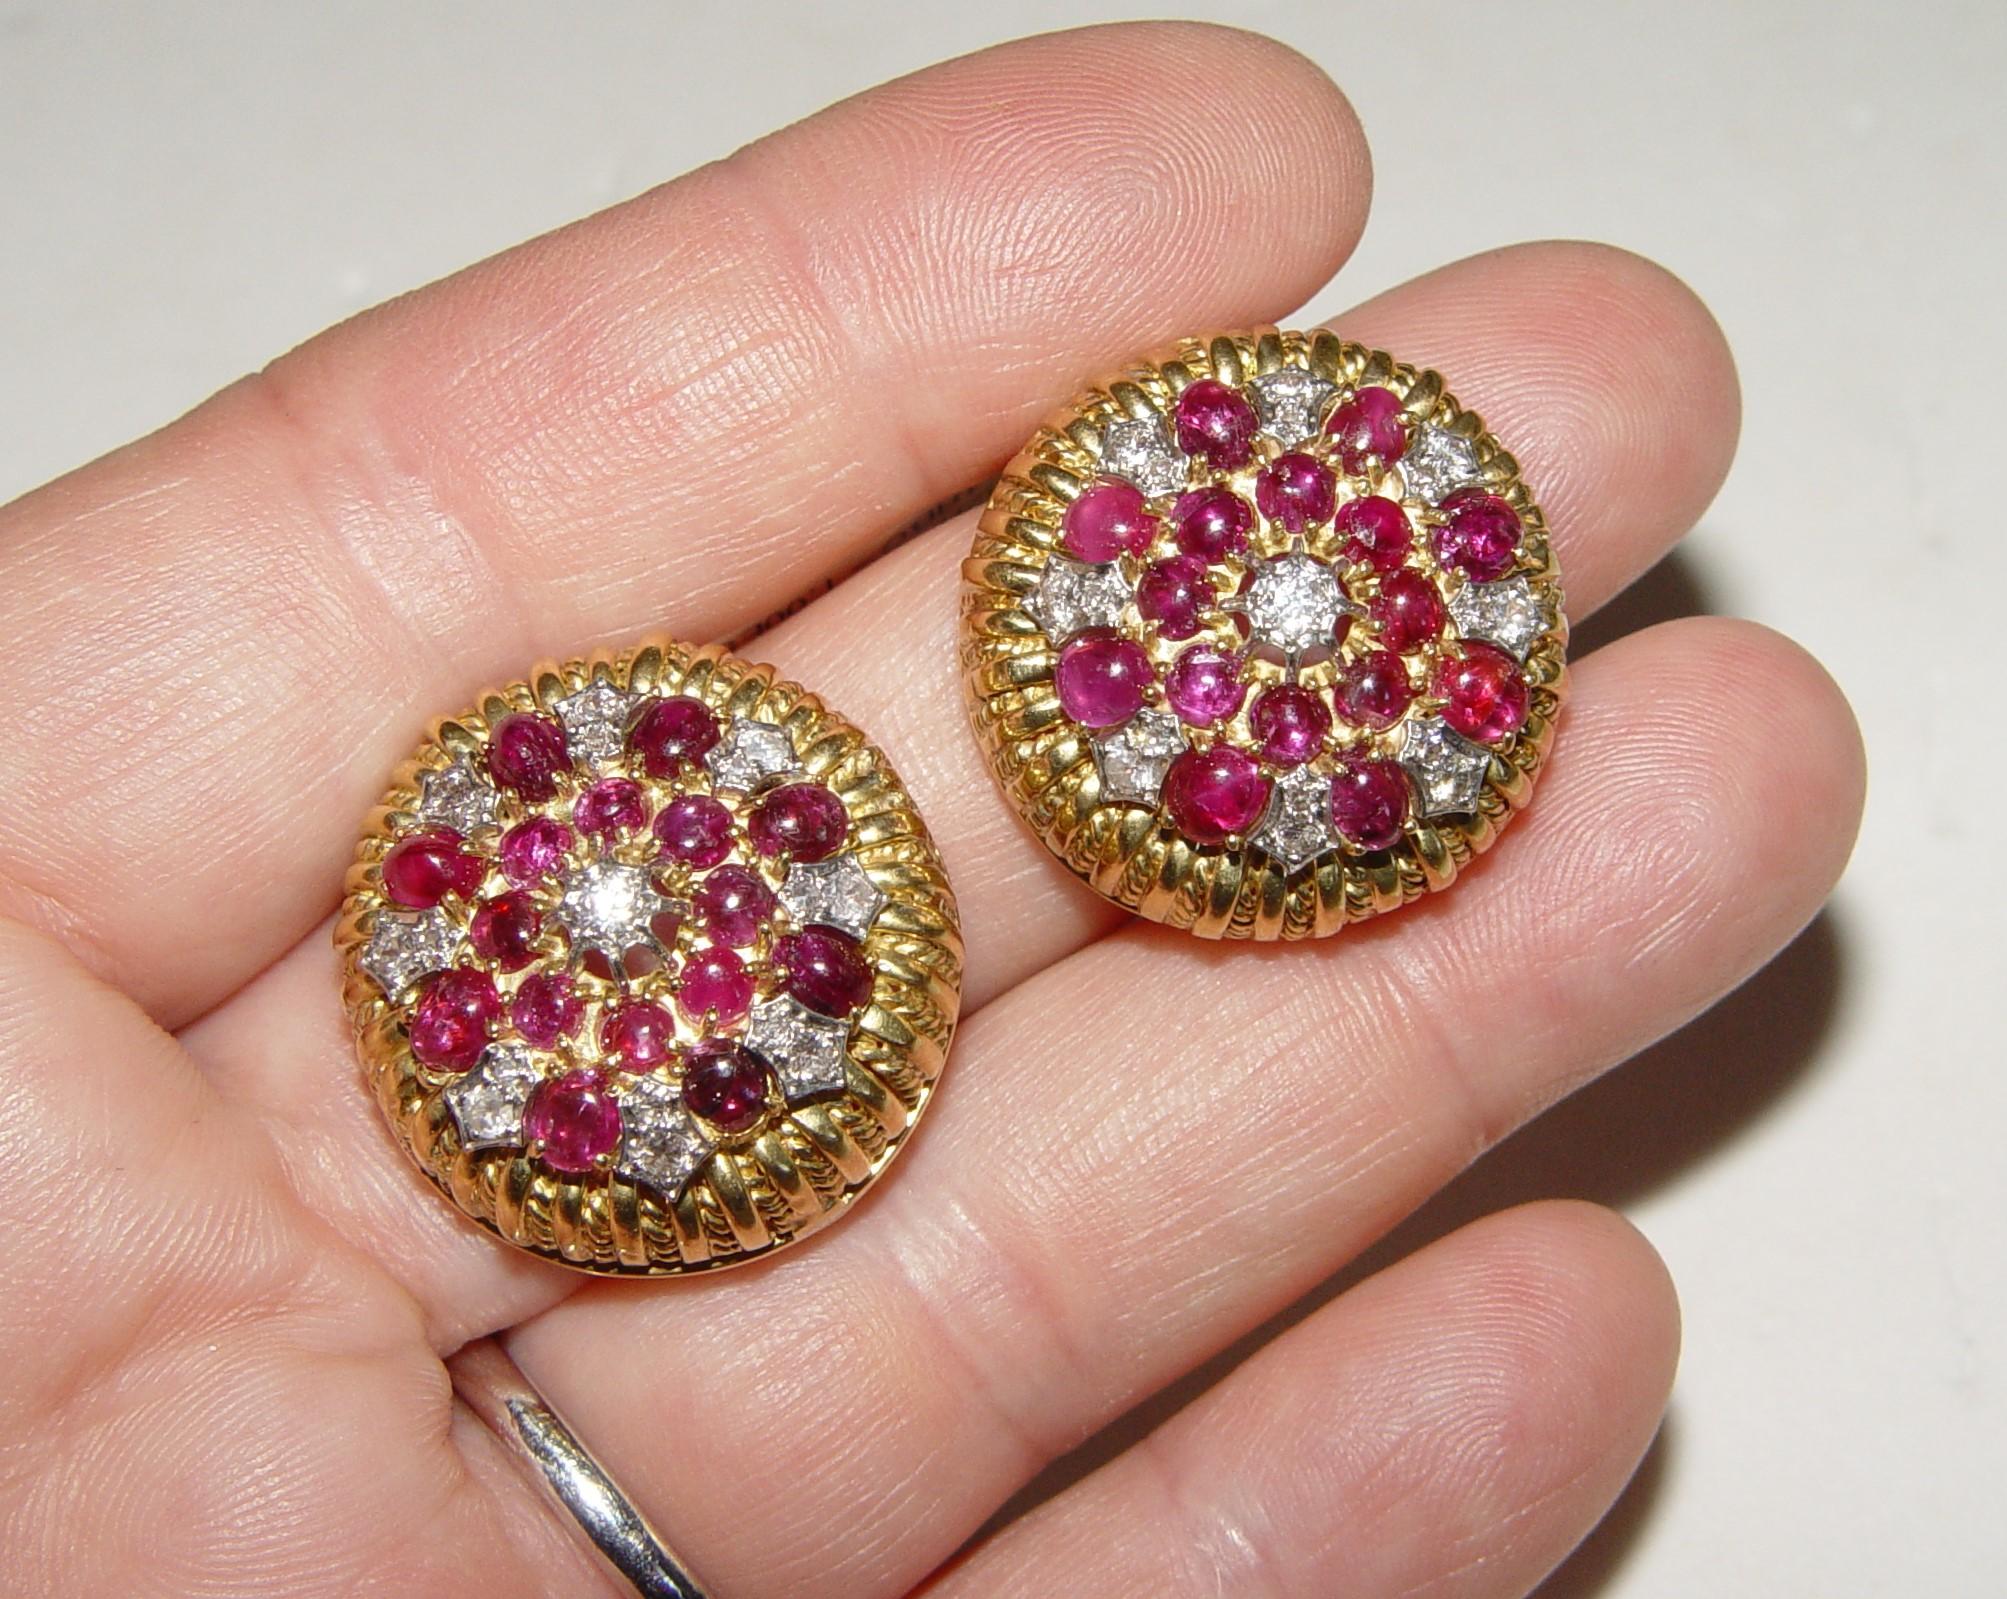 Vintage earrings (most likely 1950's) encrusted with 34 Old European and single cut Natural diamonds we estimate 1.00CT total weight (G-H-I in color, VS-SI clarity, beautiful sparkly stones. Pave set into white gold). Earrings prong set with 32